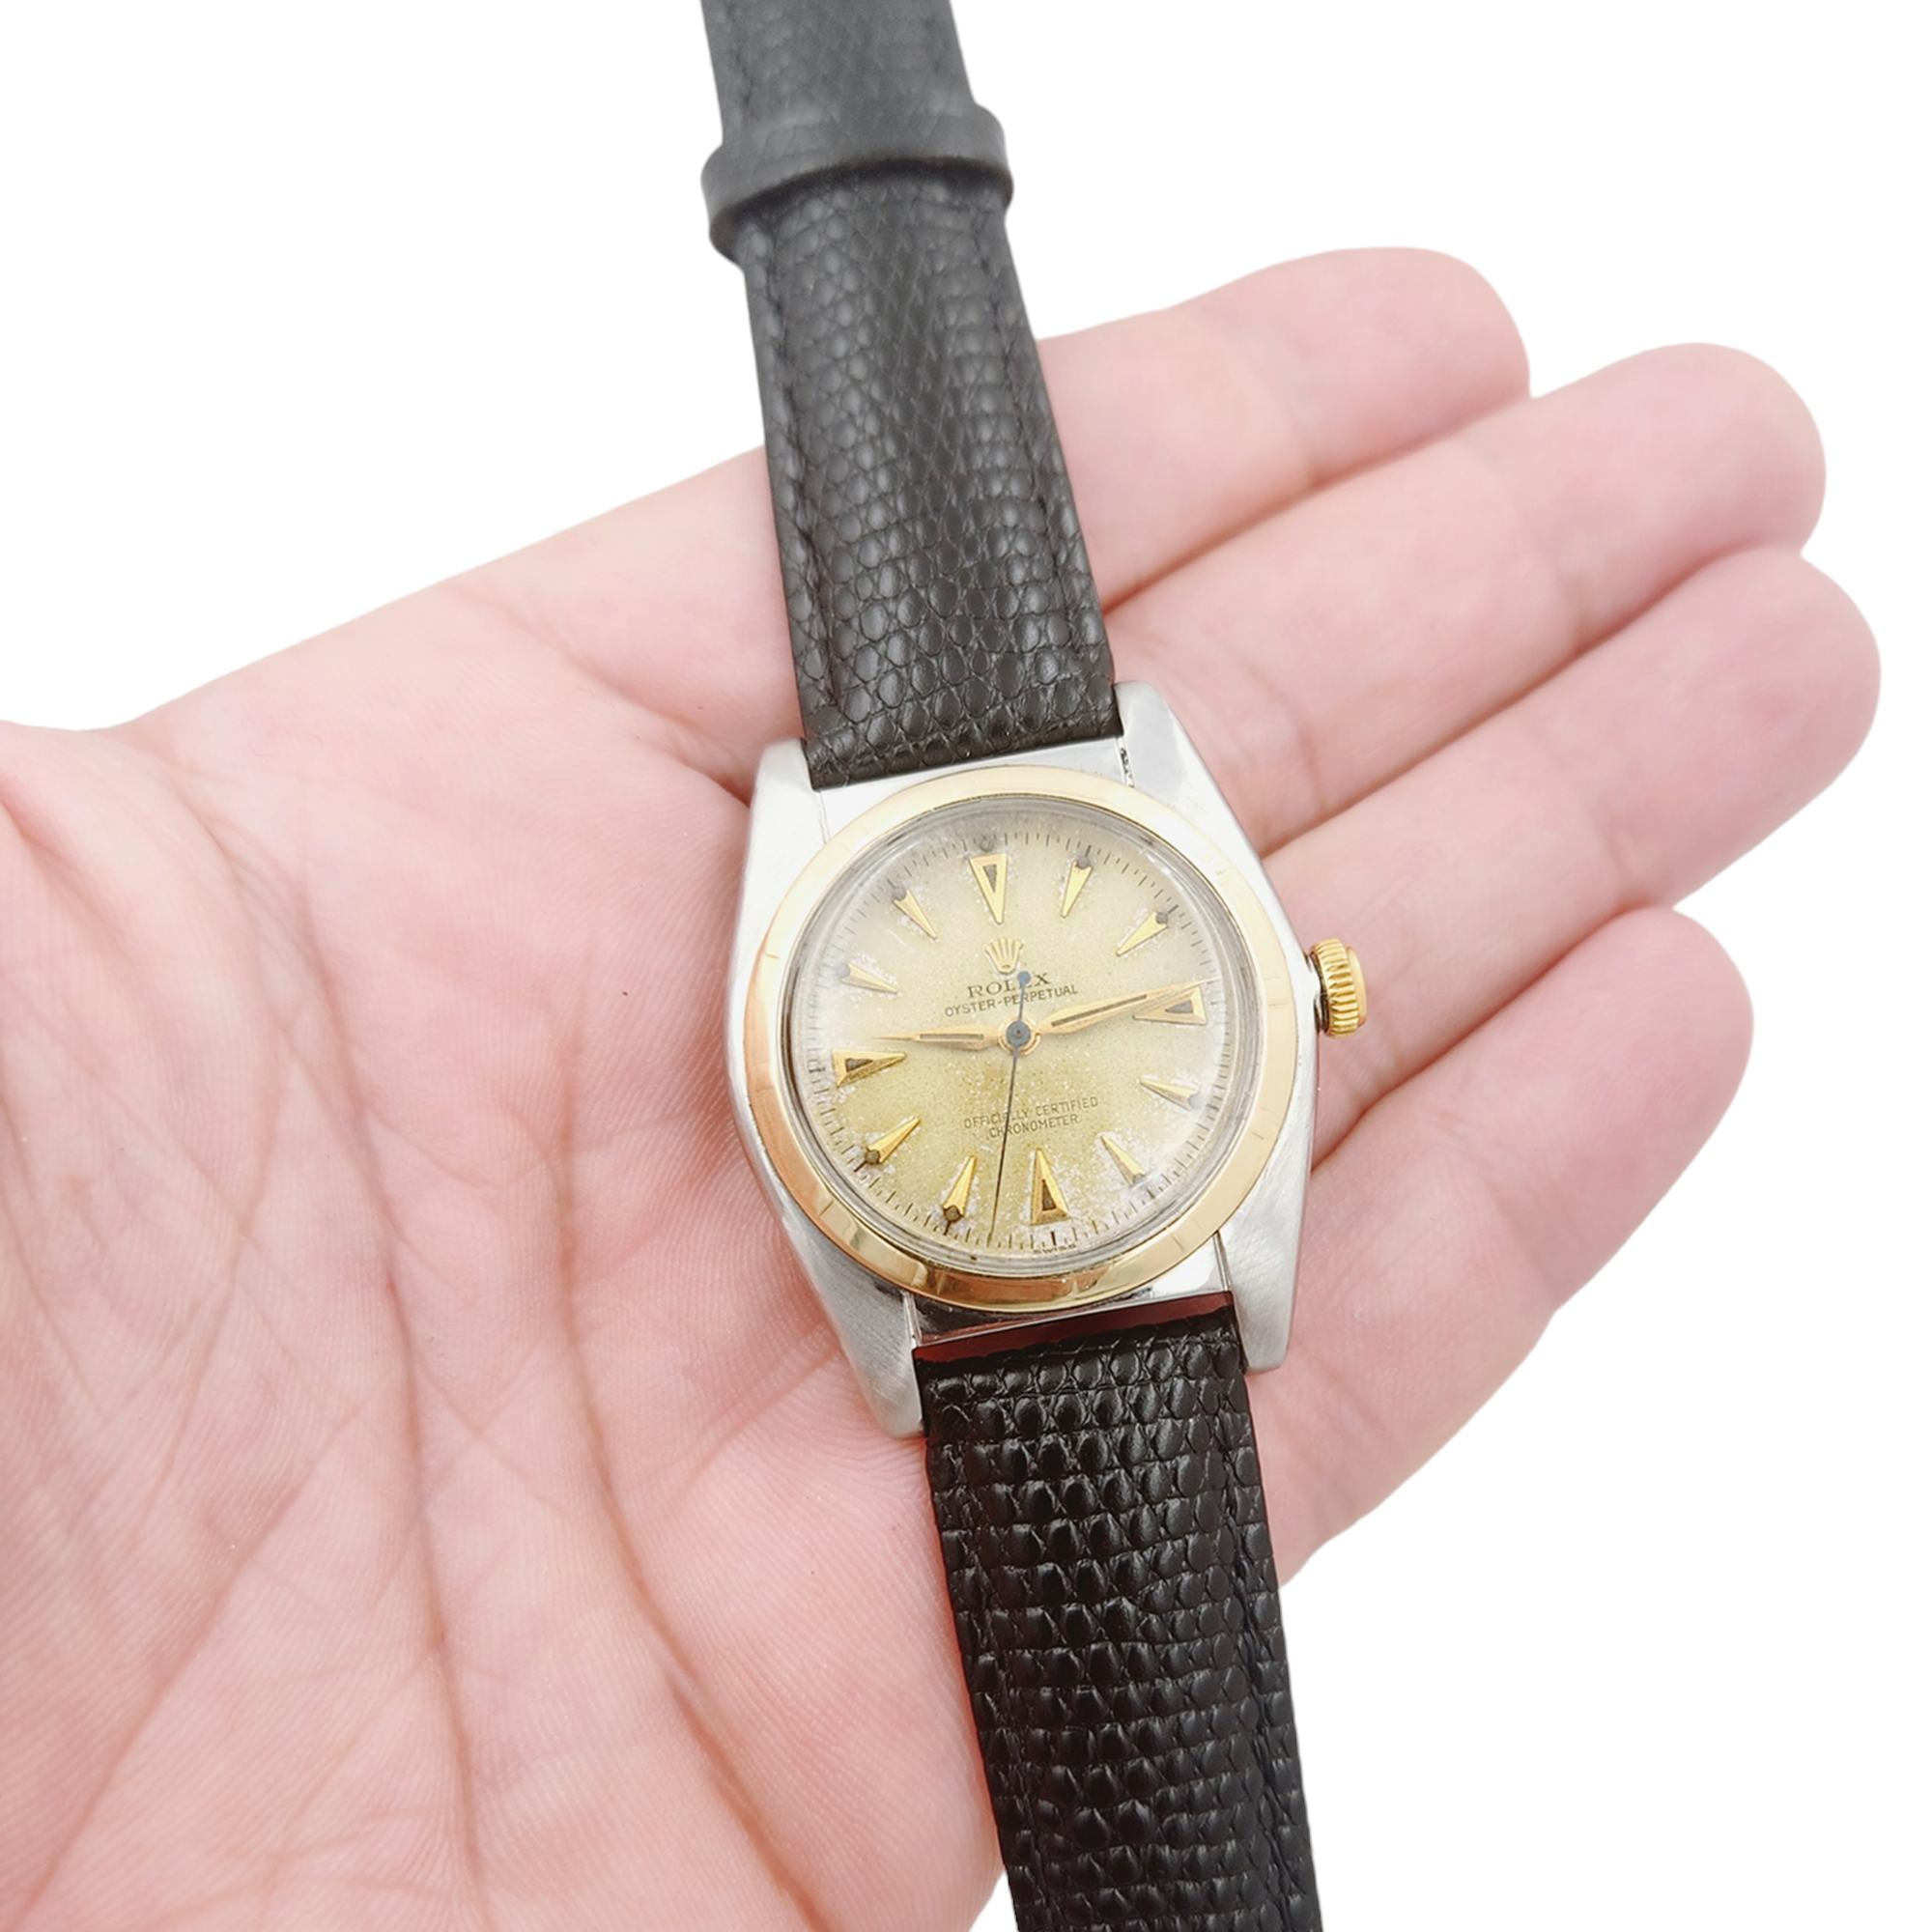 1957 Men's Rolex 32mm Bubbleback Vintage Oyster Perpetual Two Tone Wristwatch w/ Black Leather Strap & Gold Dial. (Pre-Owned 5011)